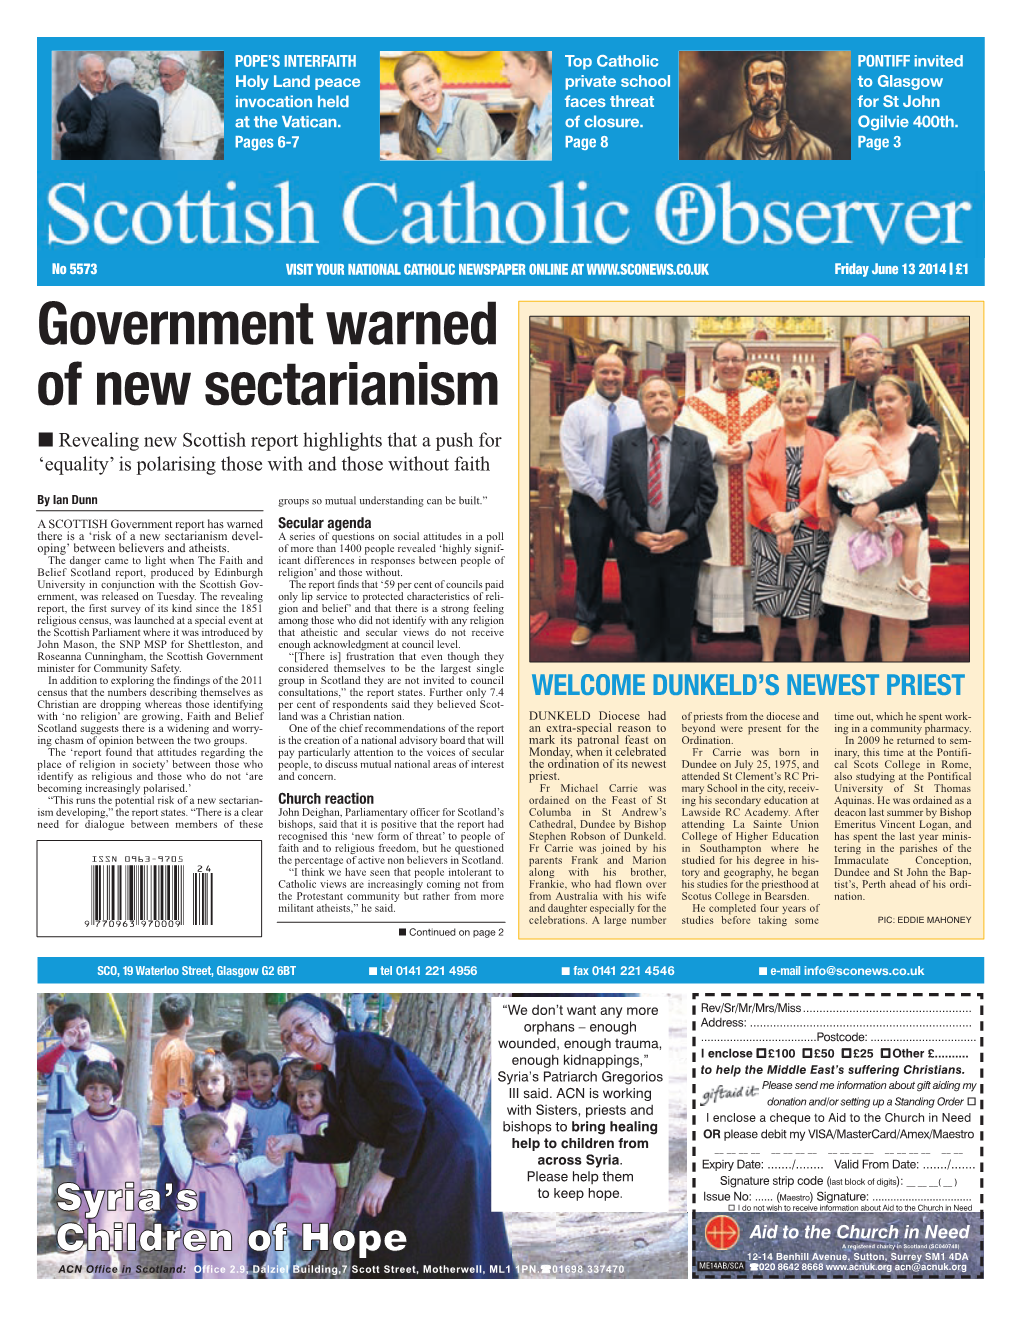 Government Warned of New Sectarianism